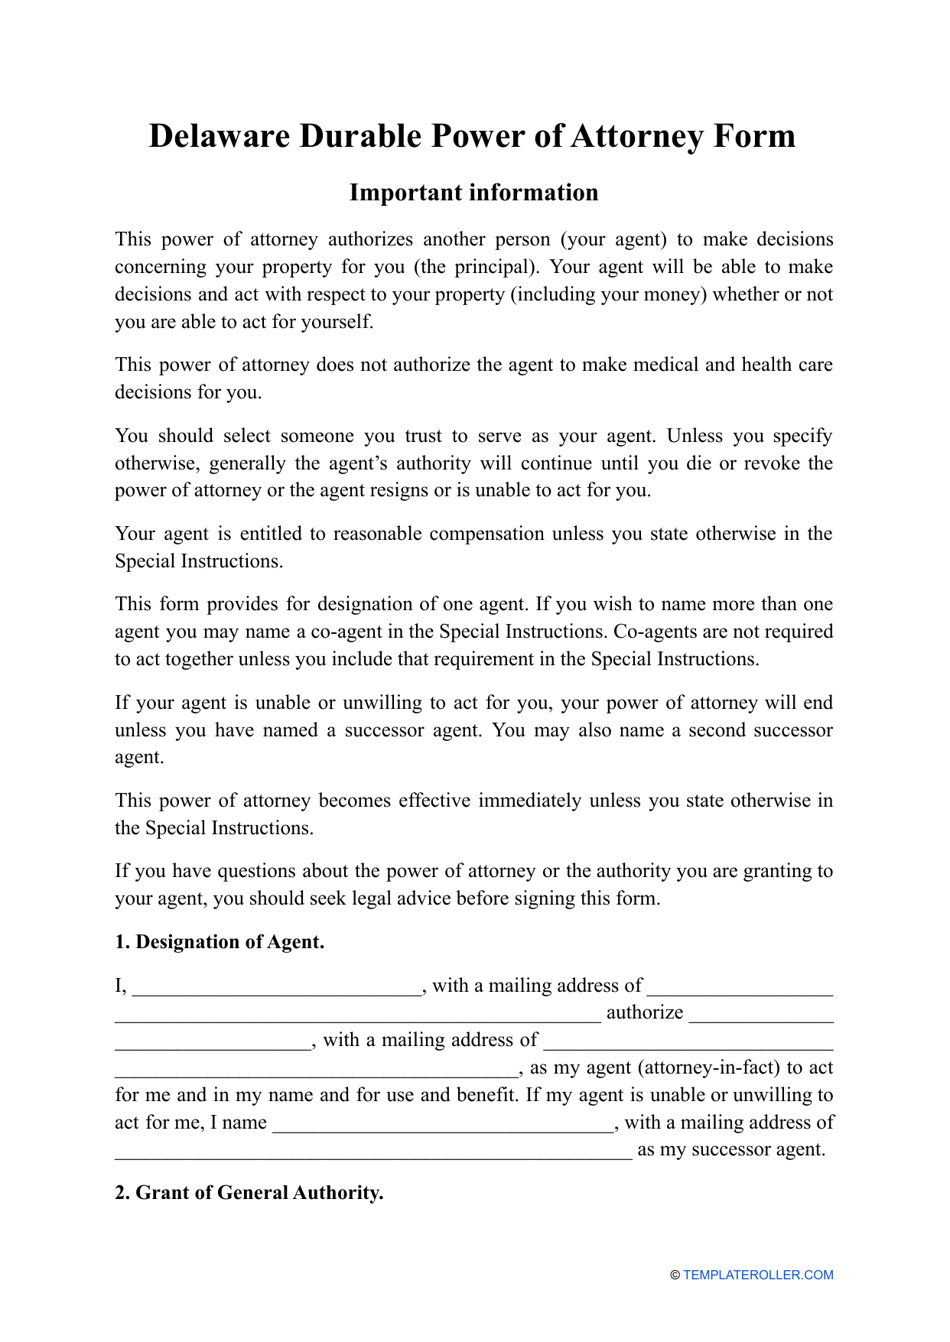 Durable Power of Attorney Form - Delaware, Page 1